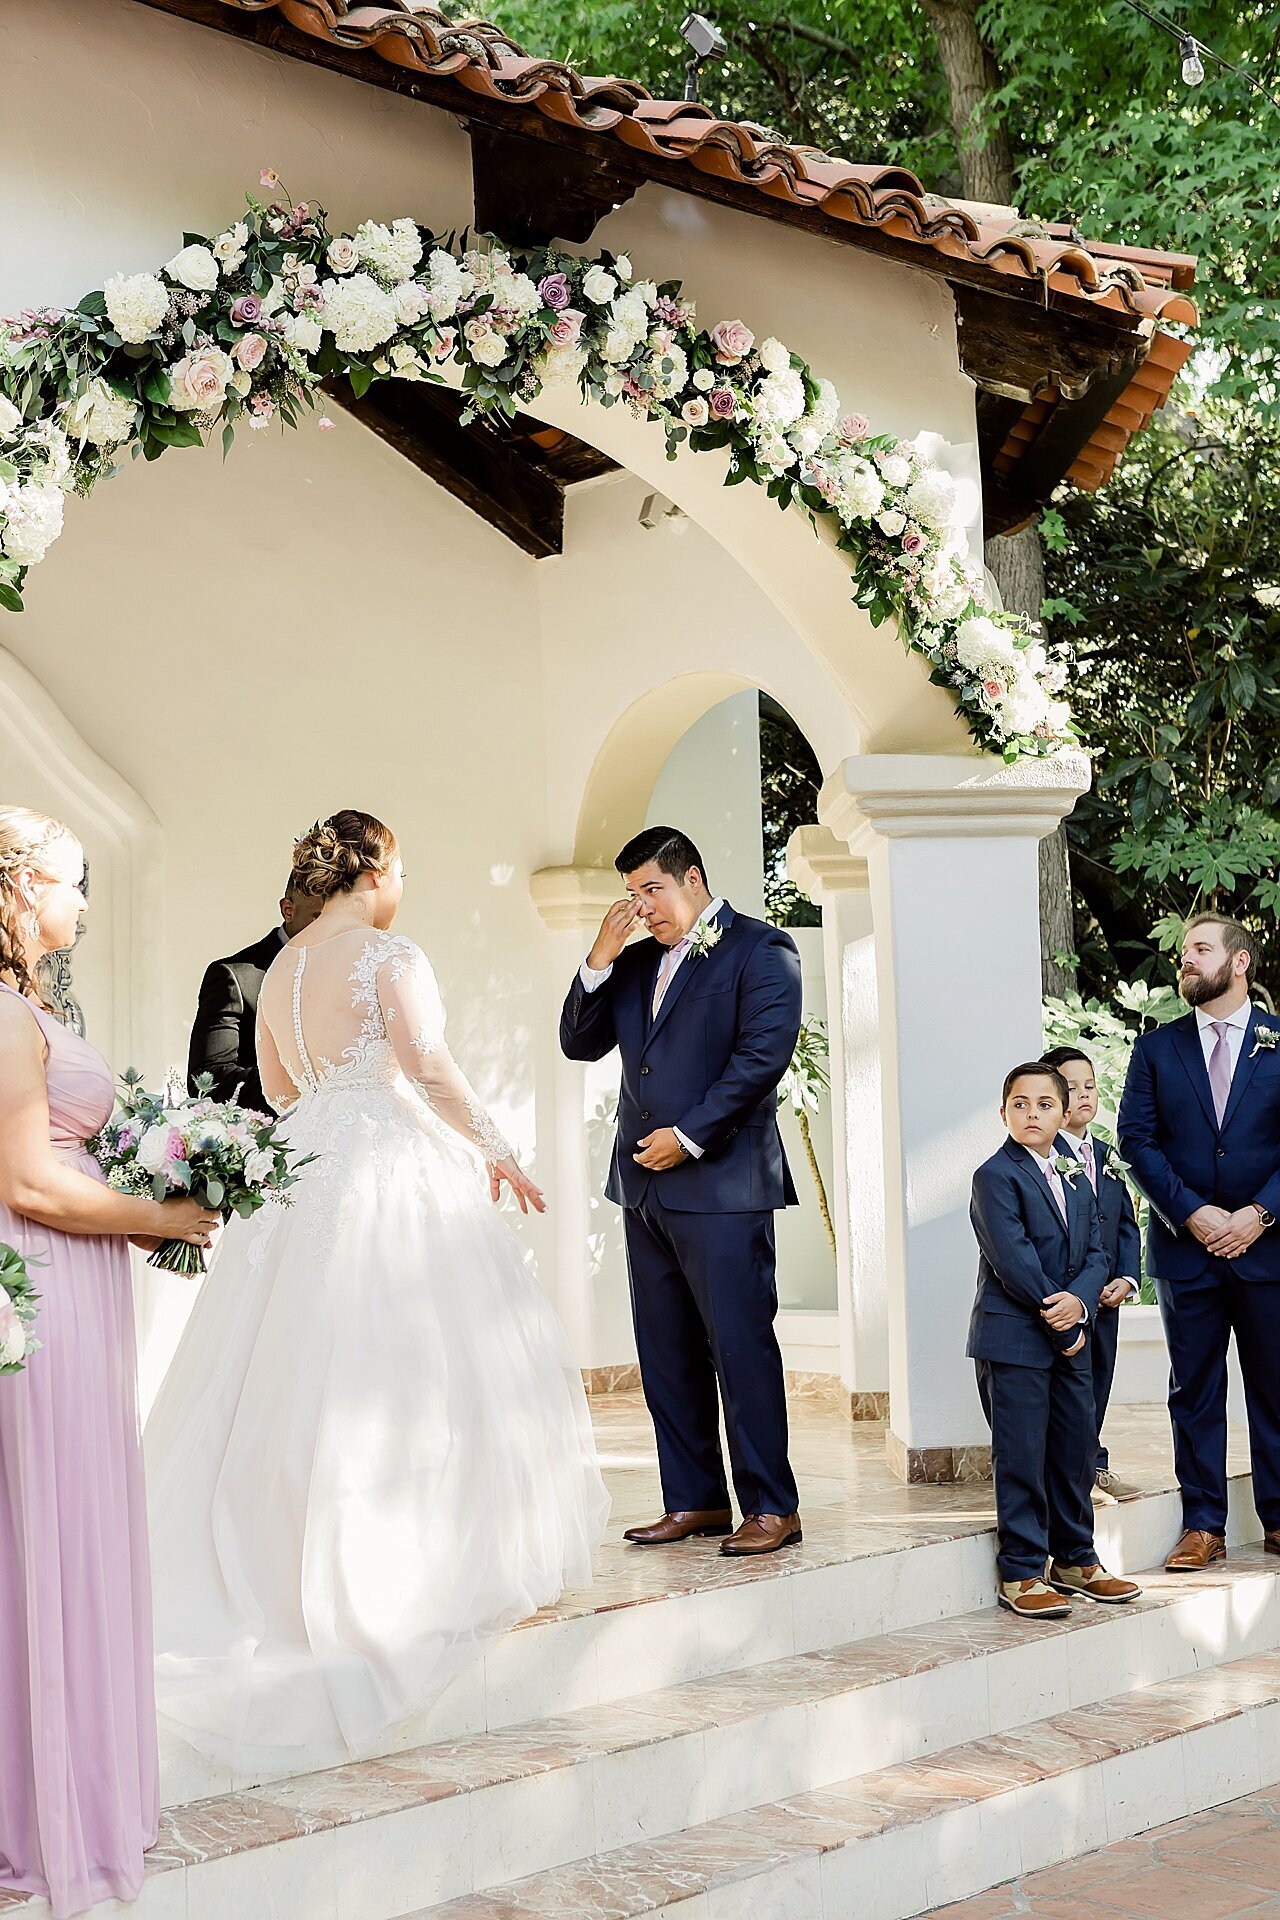 MIchelle Peterson Photography Redlands California wedding and portrait photographer_1151